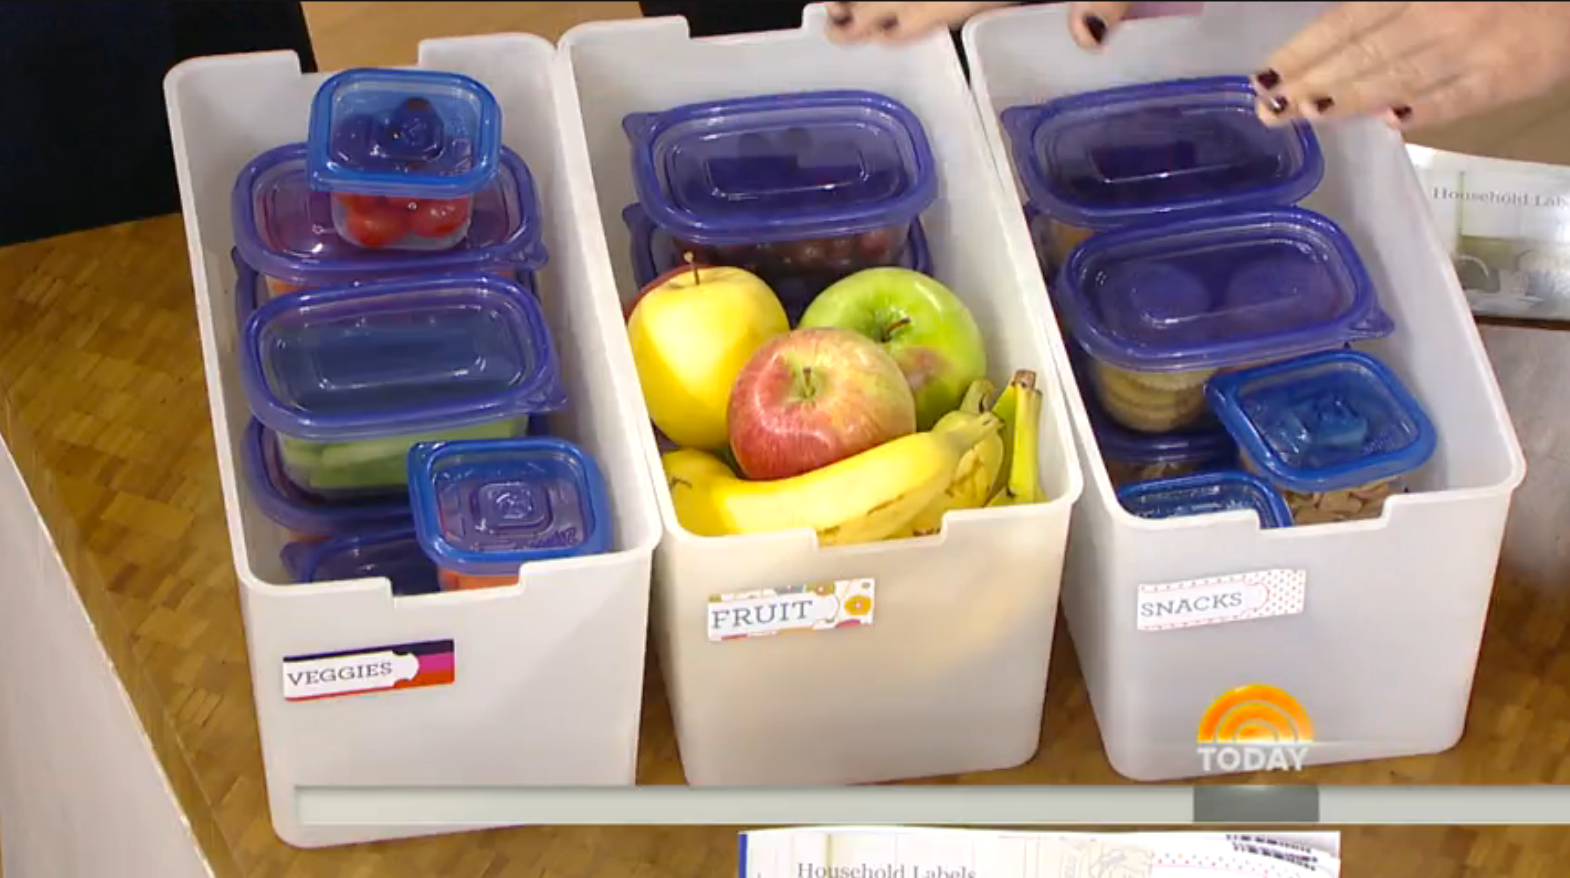 Lunch packing time-saver: Bins in the fridge marked veggies, fruit, snacks, let kids pick their own each day | CoolMomPicks.com + TODAY Show Parenting Team